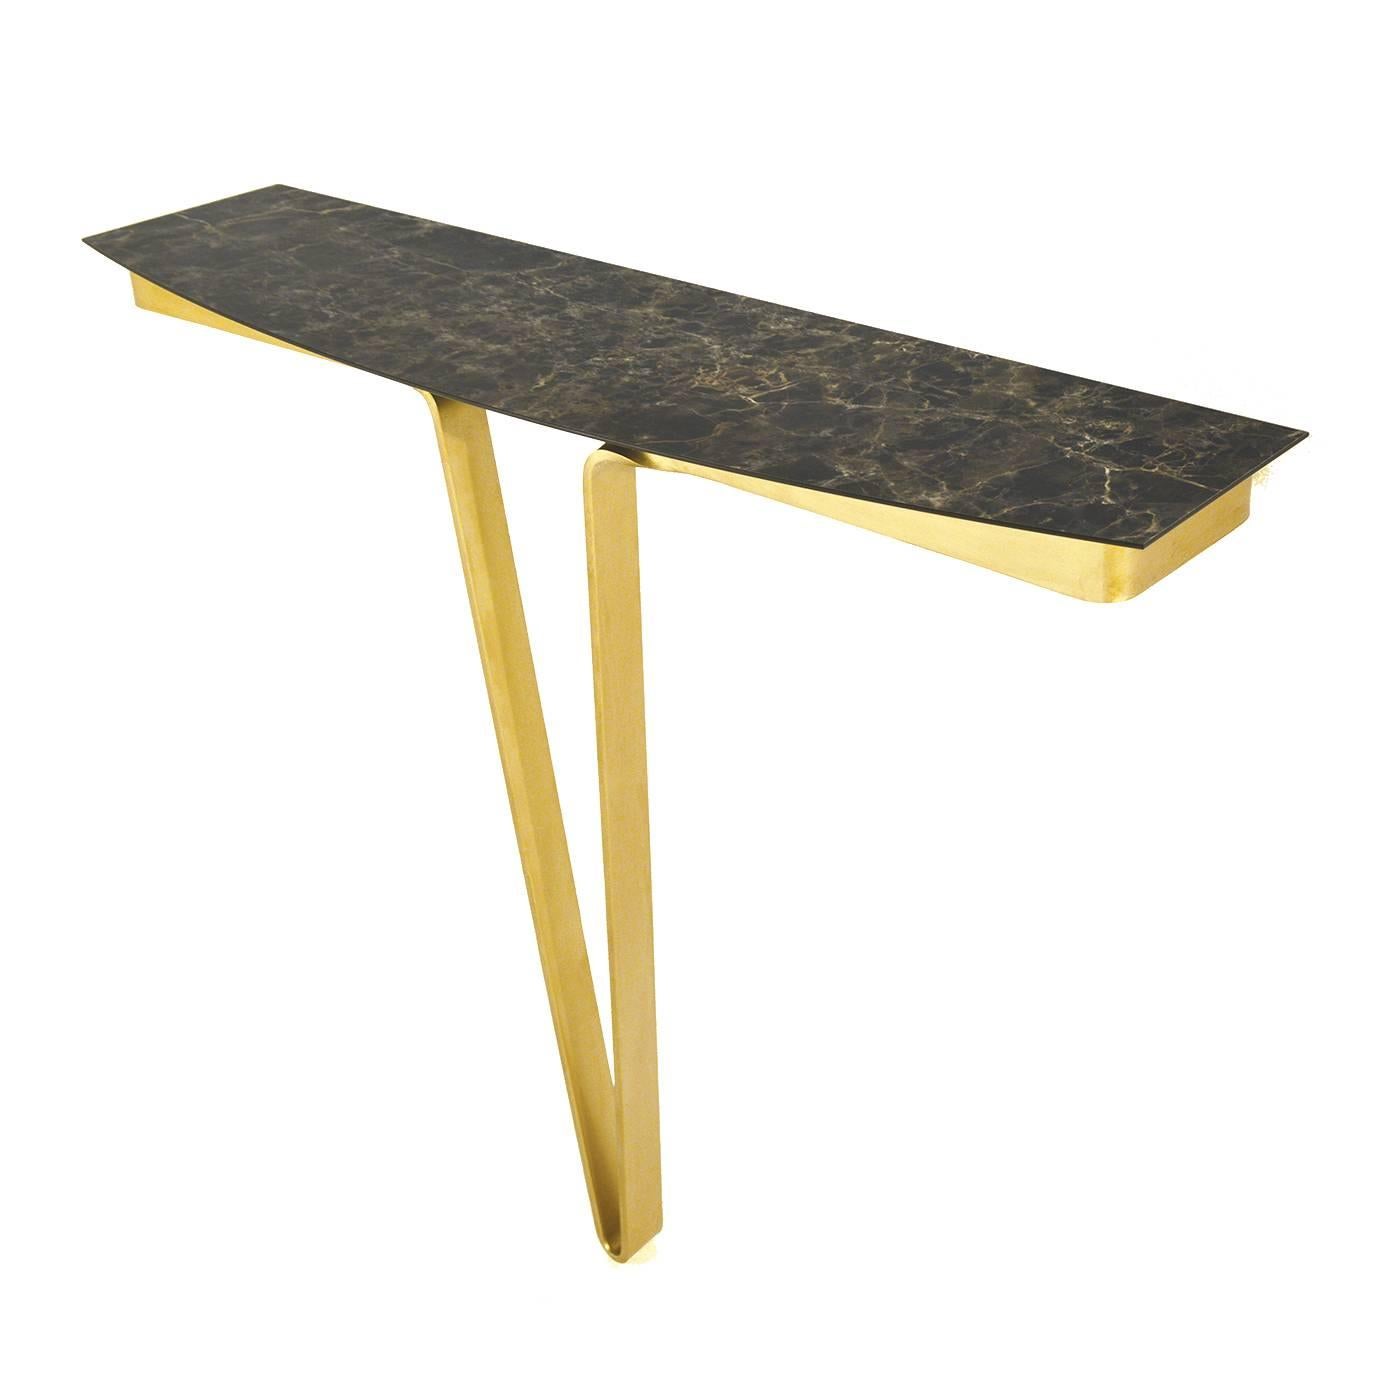 This minimalist console integrates modern design with functionality and originality. The base, a single V-shaped leg, is made of hand-forged iron blade with a striking burnished gold antique finish, while the rectangular top is of stratified HPL MOD